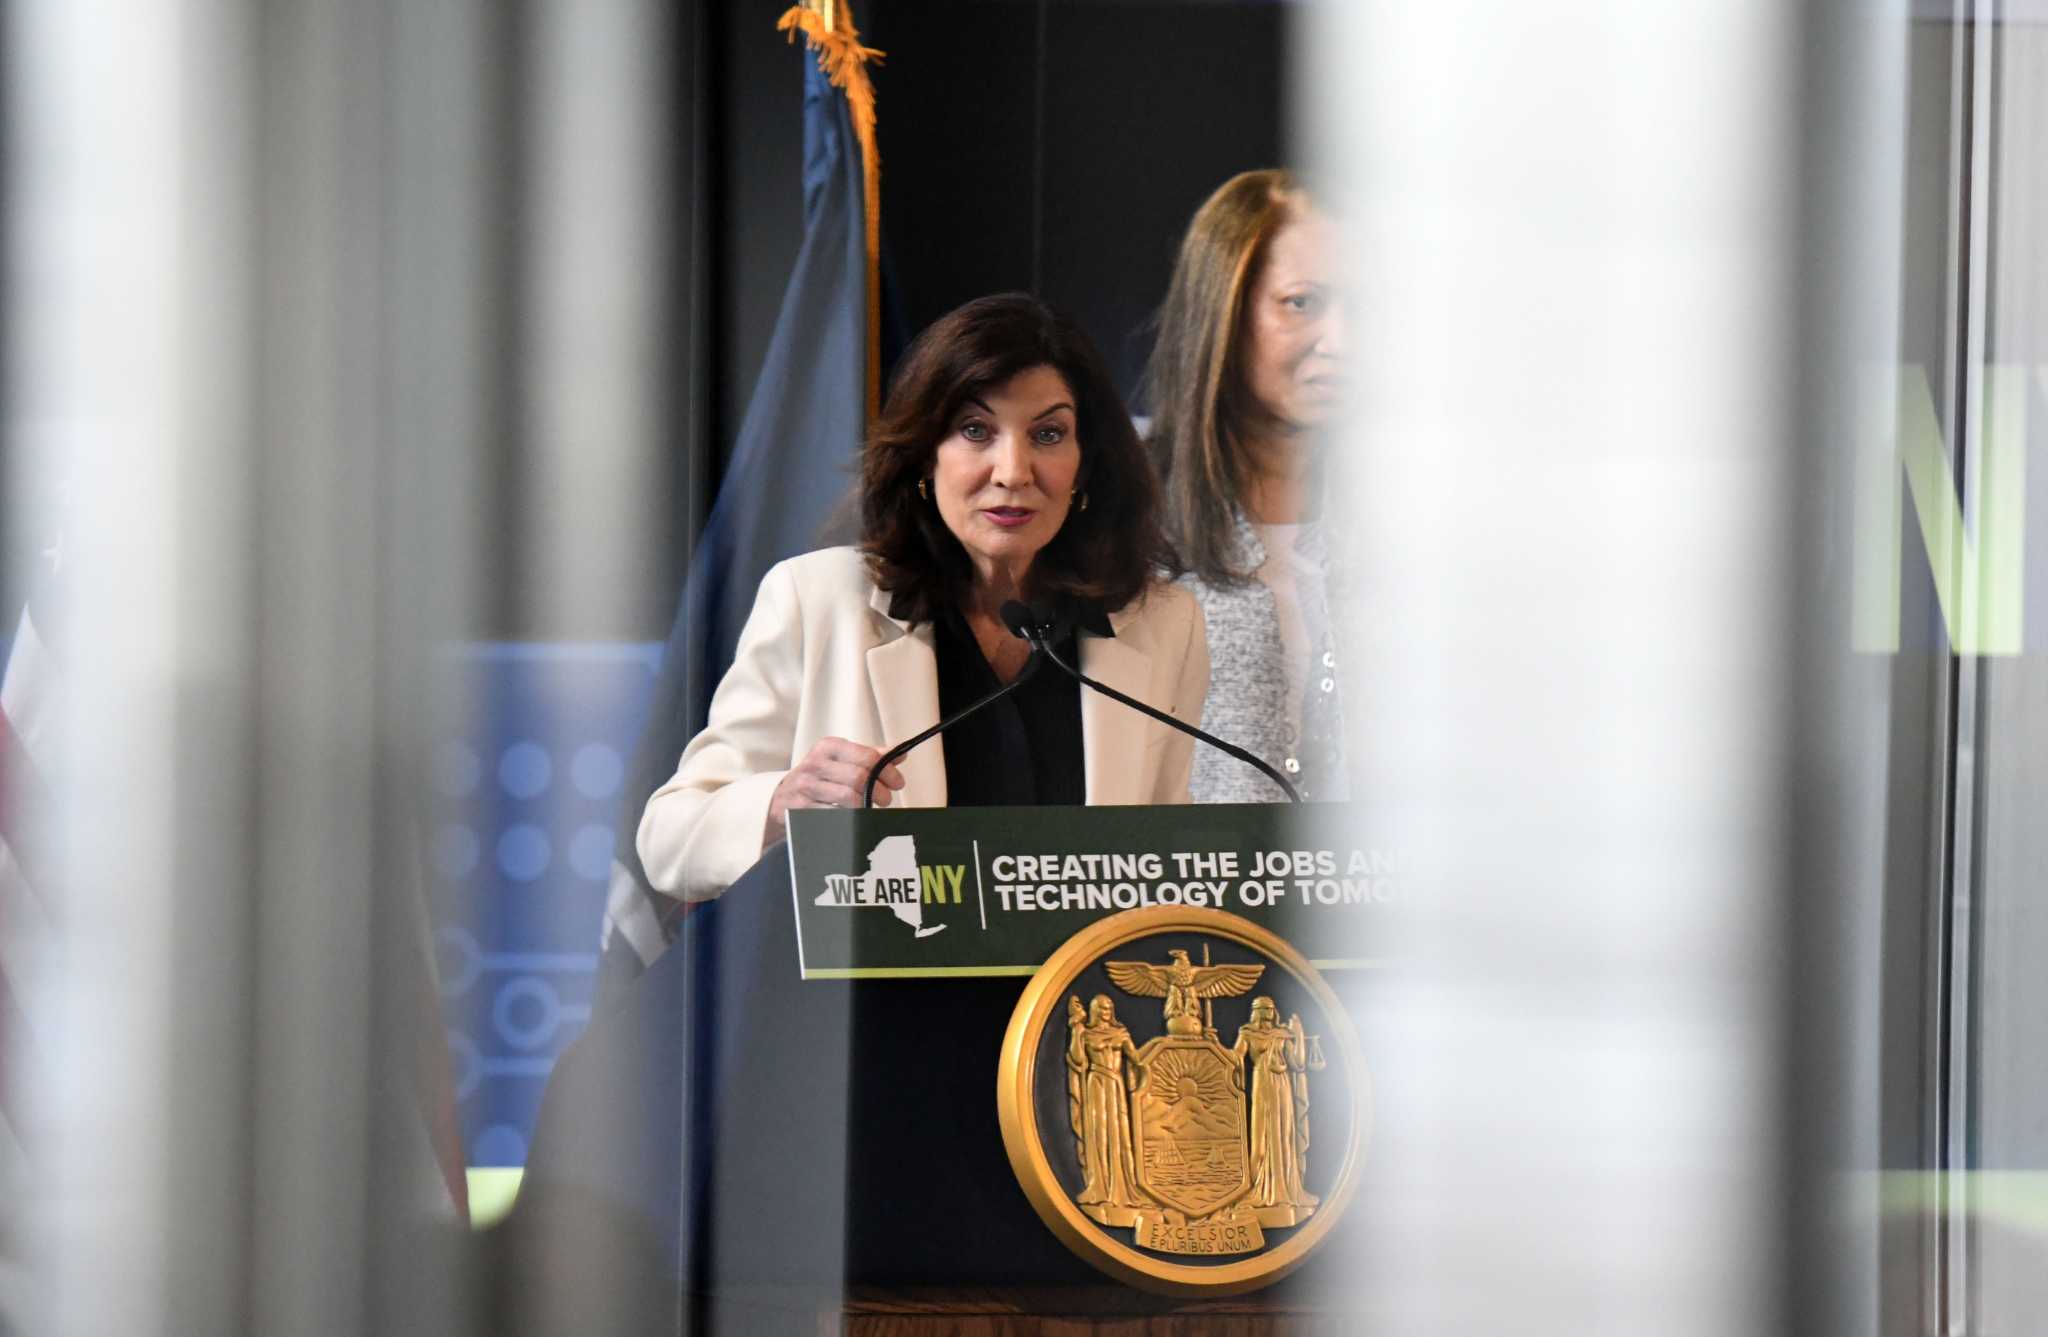 Hochul signals desire to keep noncompetes for high earners